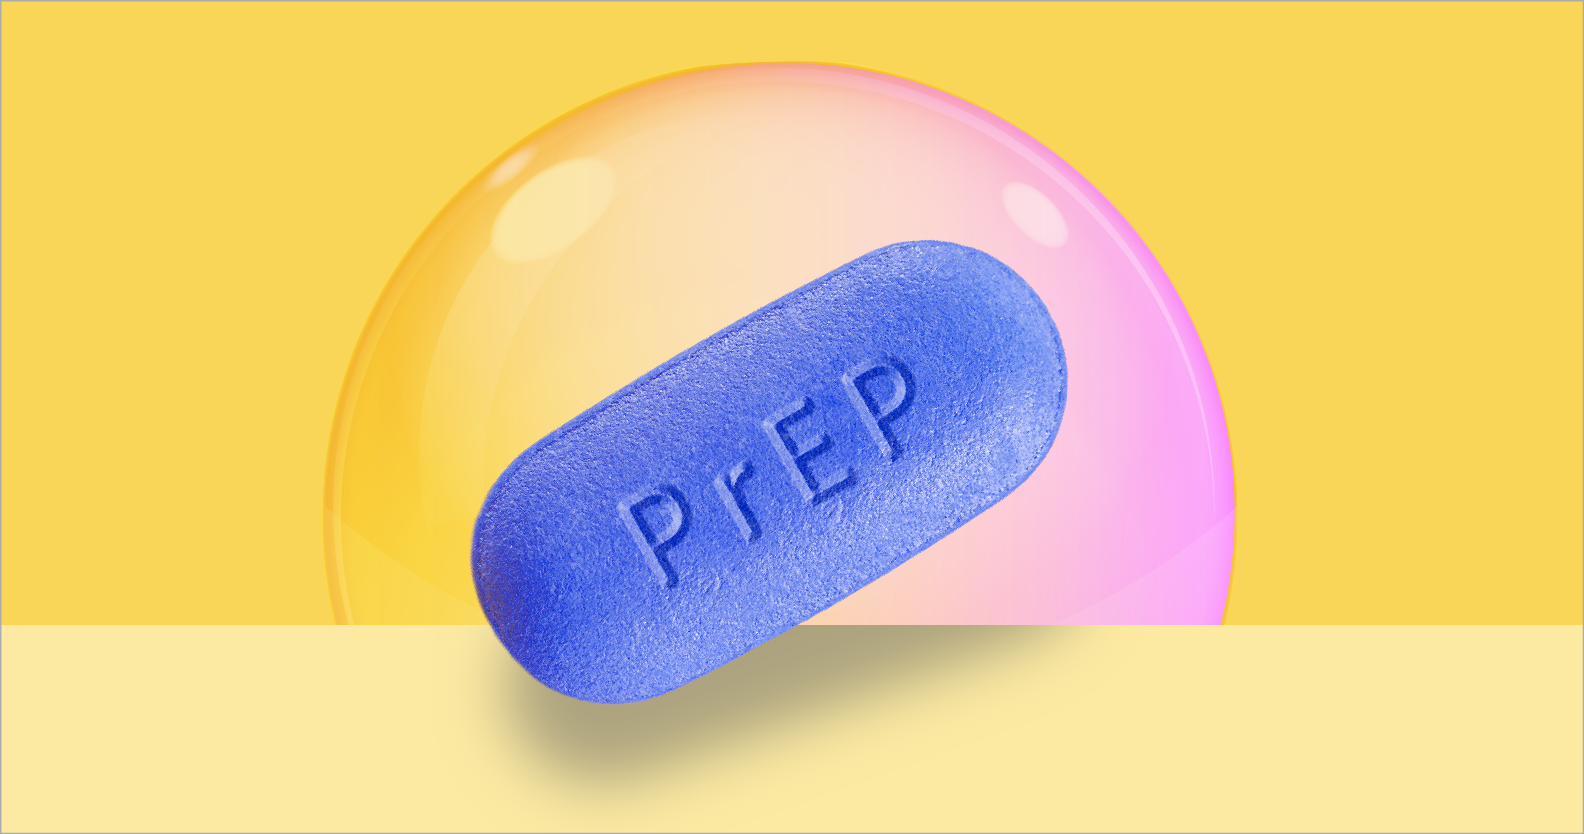 A doctor's guide to PrEP